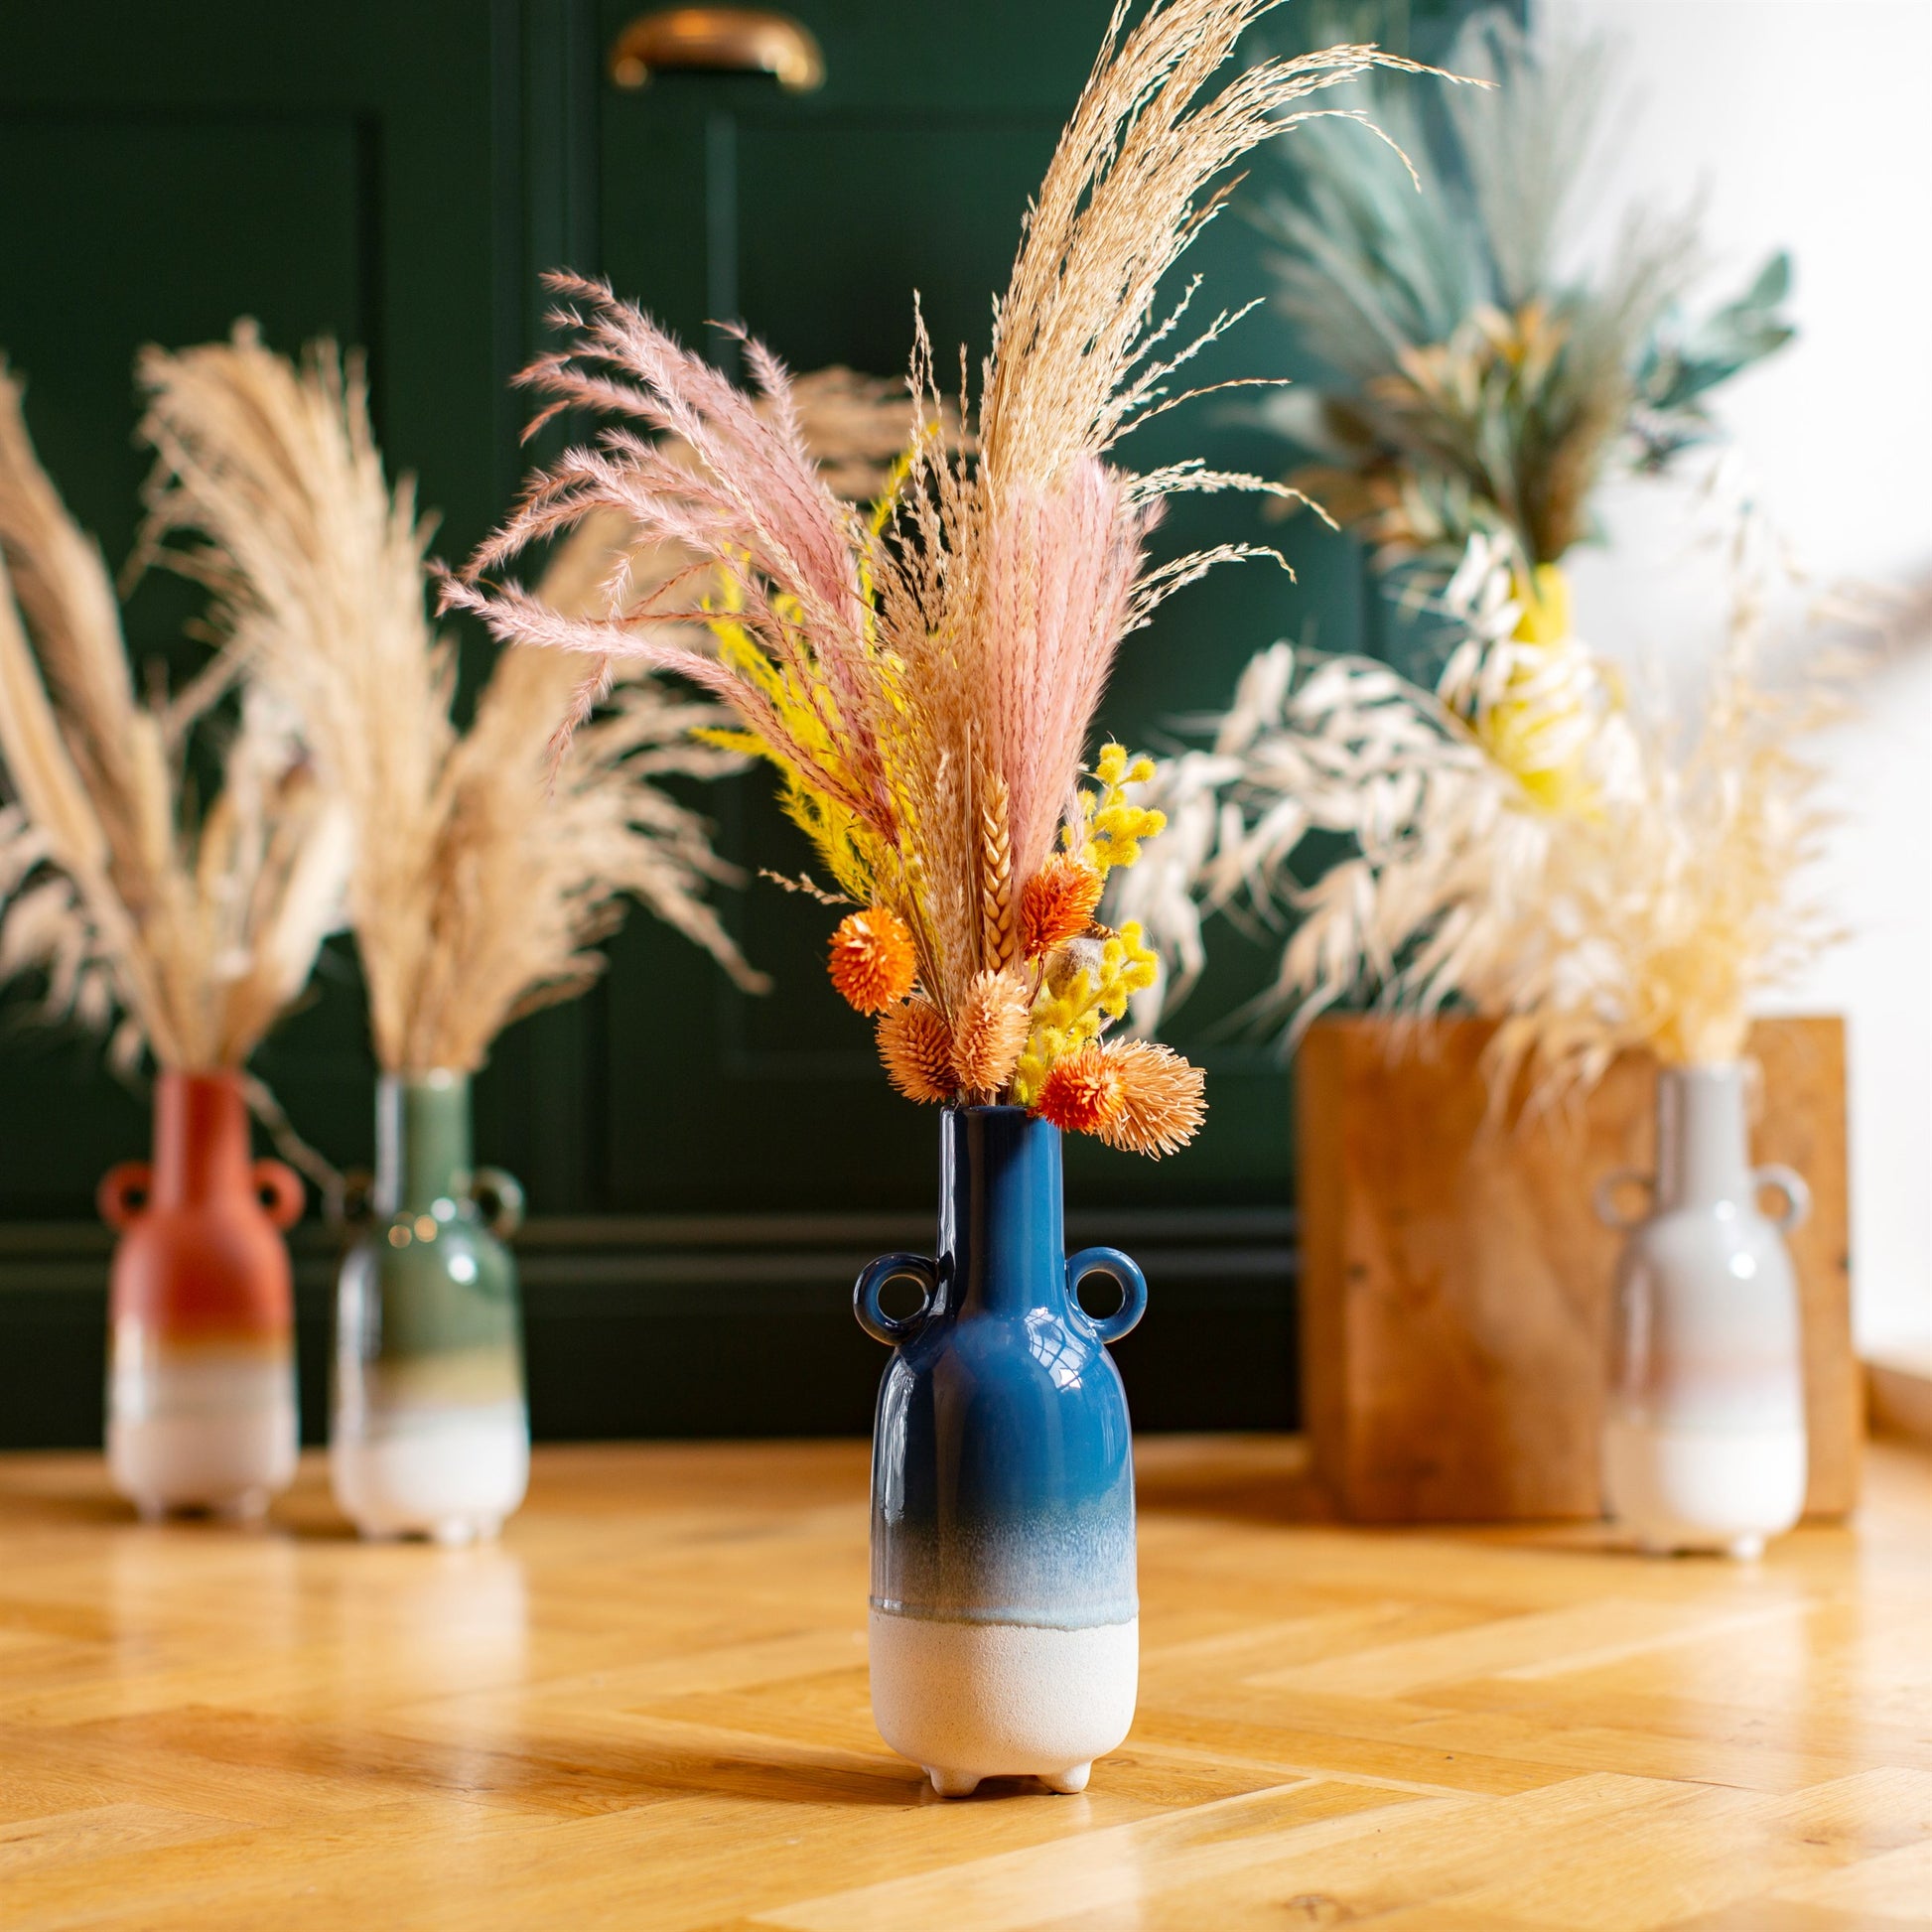 Blue Ombre Vase with dried flowers in a lifestyle image